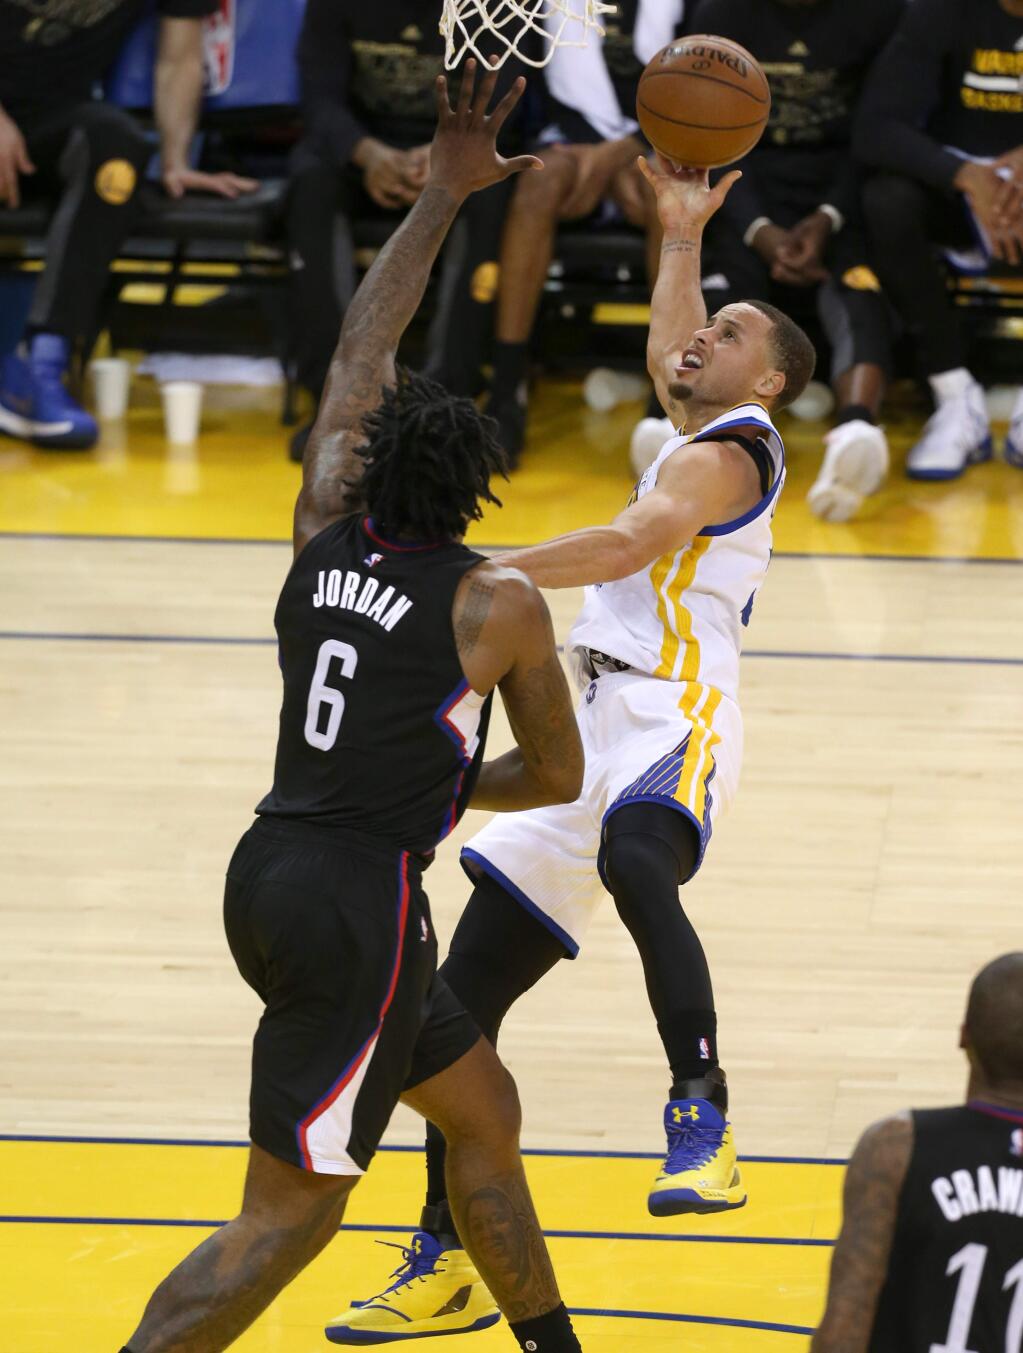 Golden State Warriors' Stephen Curry is fouled by Los Angeles Clippers' DeAndre Jordan as he goes to the basket in Oakland on Thursday, February 23. (Christopher Chung/ The Press Democrat)